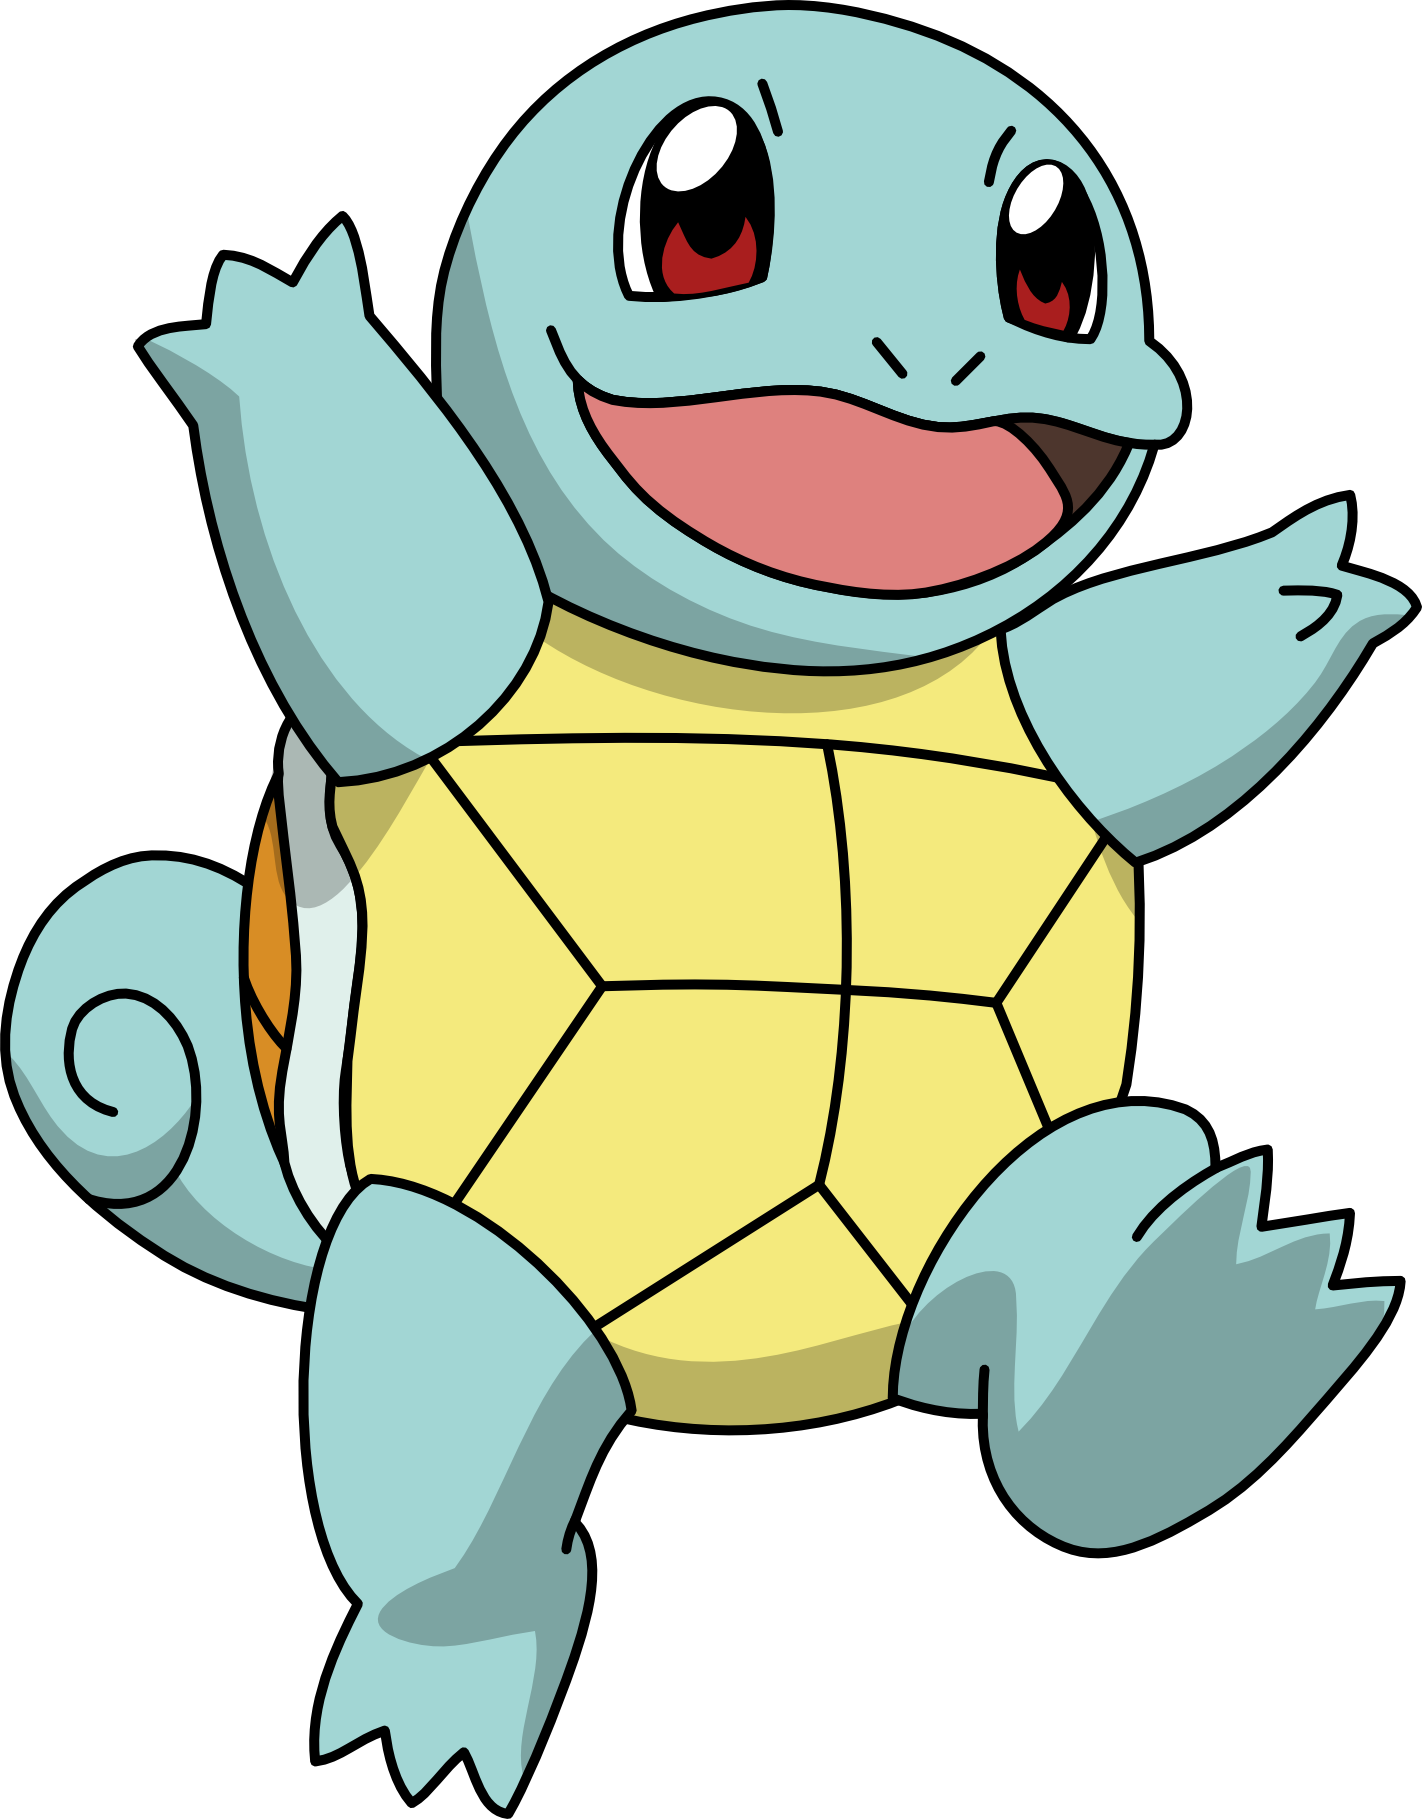 Image Result For Squirtle - Pokemon Squirtle (1422x1819)